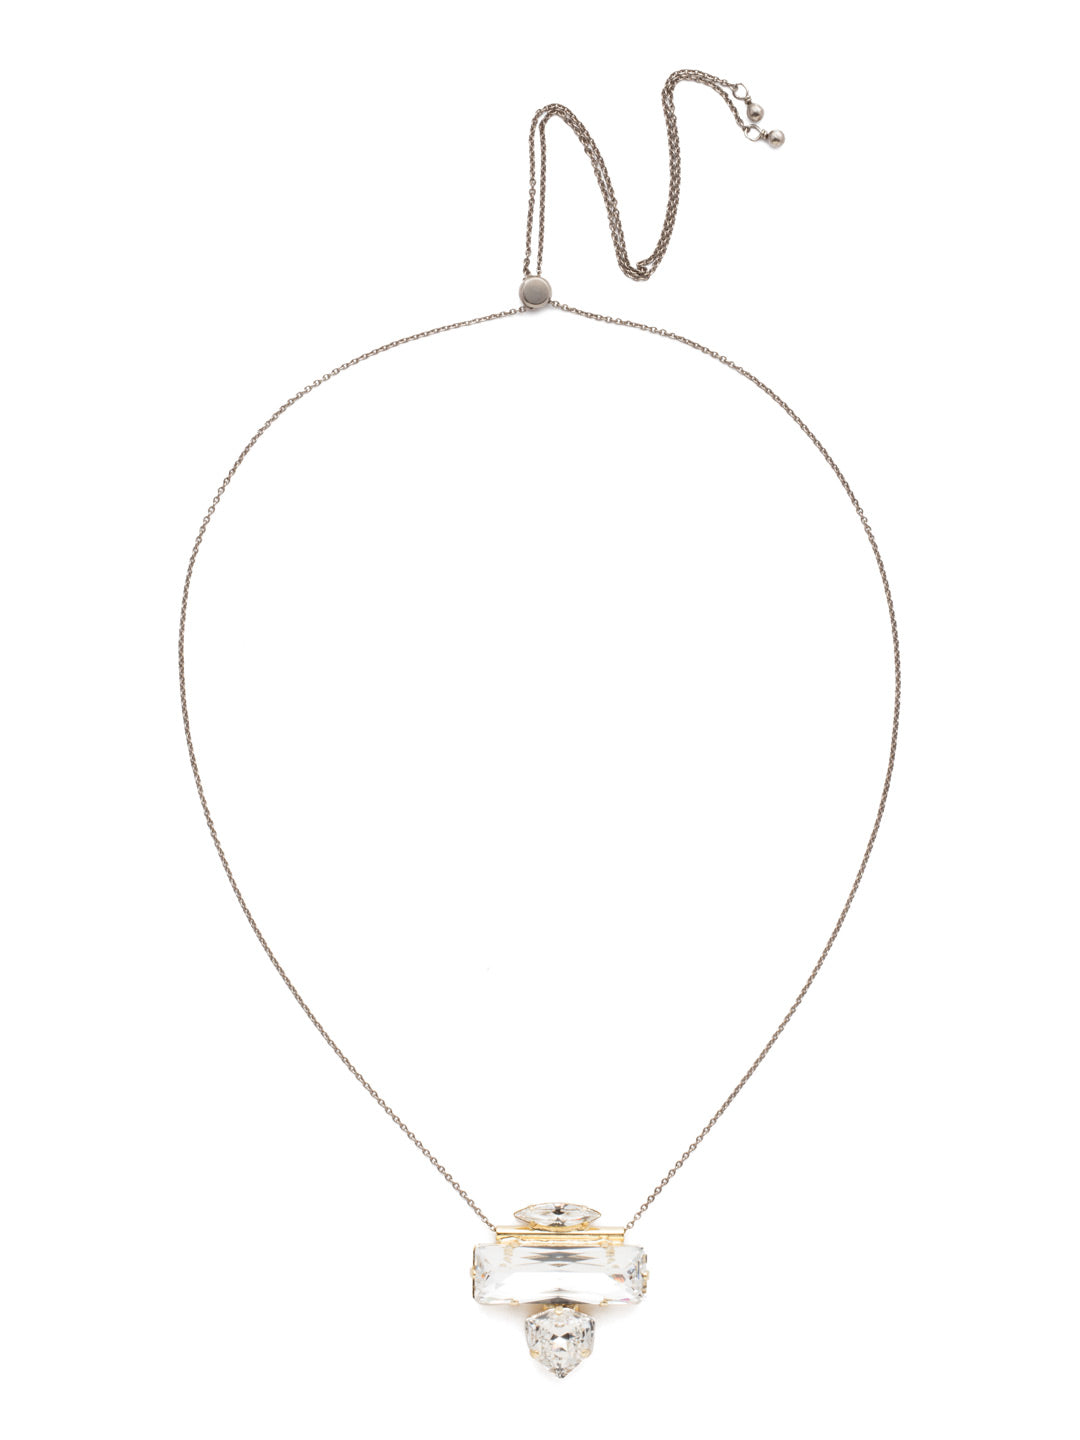 Lucinda Slider Necklace - 4NEN9MXCRY - <p>Edgy, but simple. This abstract pendant will take any look from day to night. From Sorrelli's Crystal collection in our Mixed Metal finish.</p>